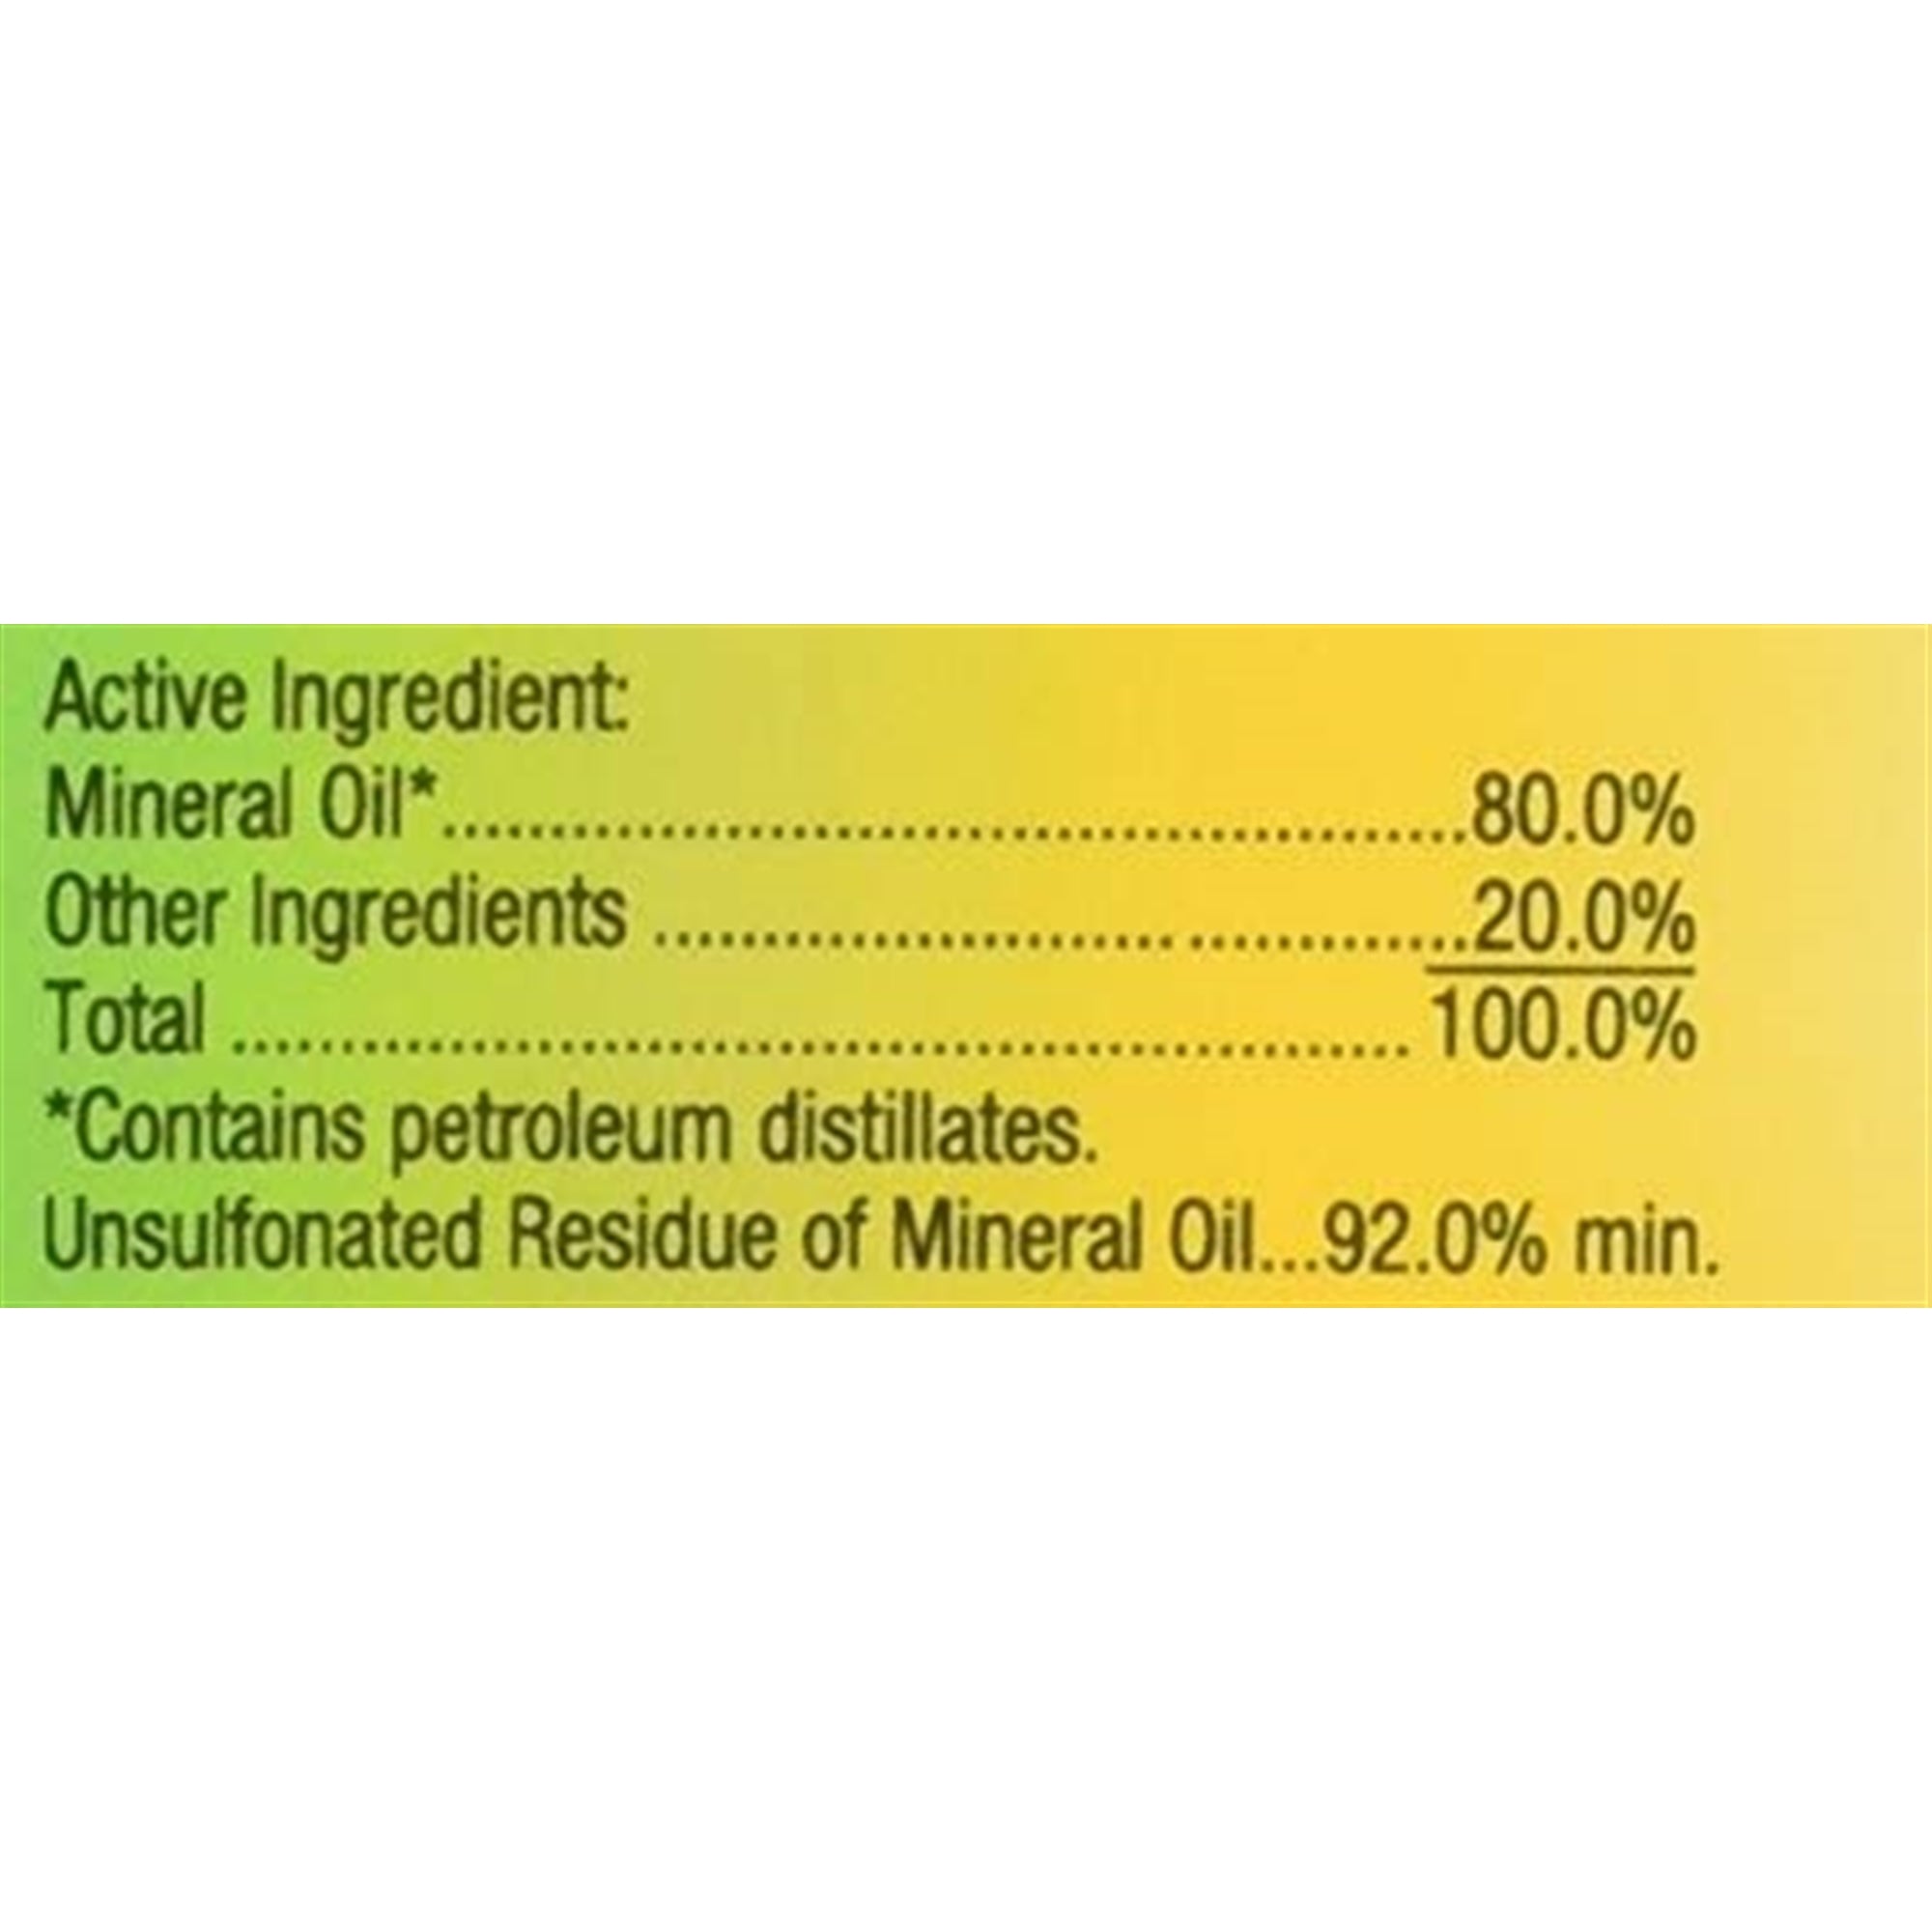 Monterey Horticultural Oil Ready to Use Concentrate, 32 Ounces